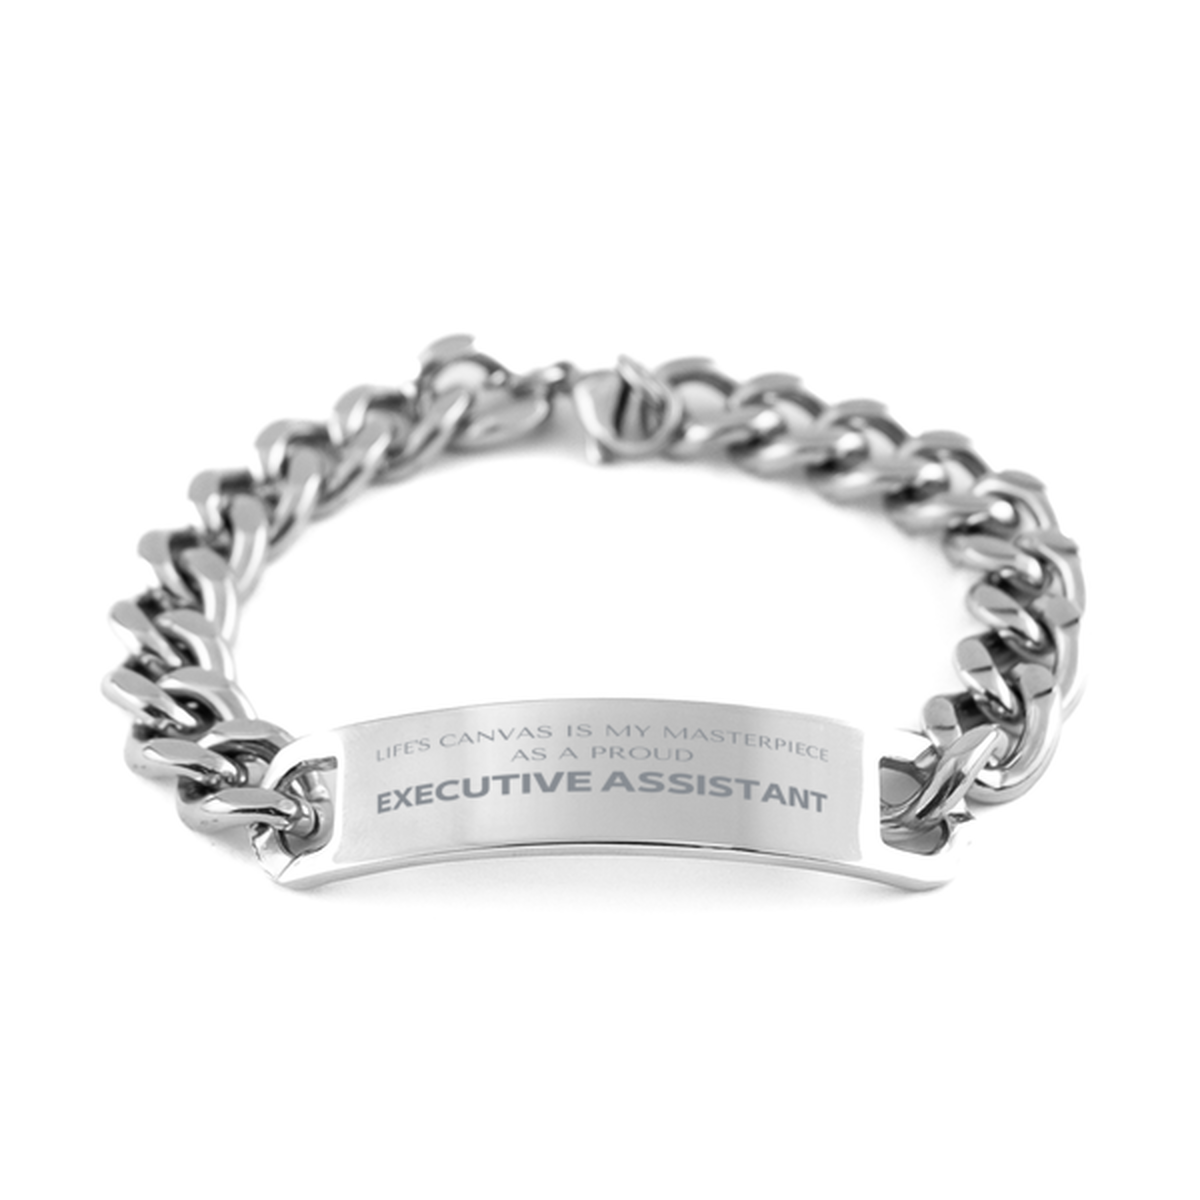 Proud Executive Assistant Gifts, Life's canvas is my masterpiece, Epic Birthday Christmas Unique Cuban Chain Stainless Steel Bracelet For Executive Assistant, Coworkers, Men, Women, Friends